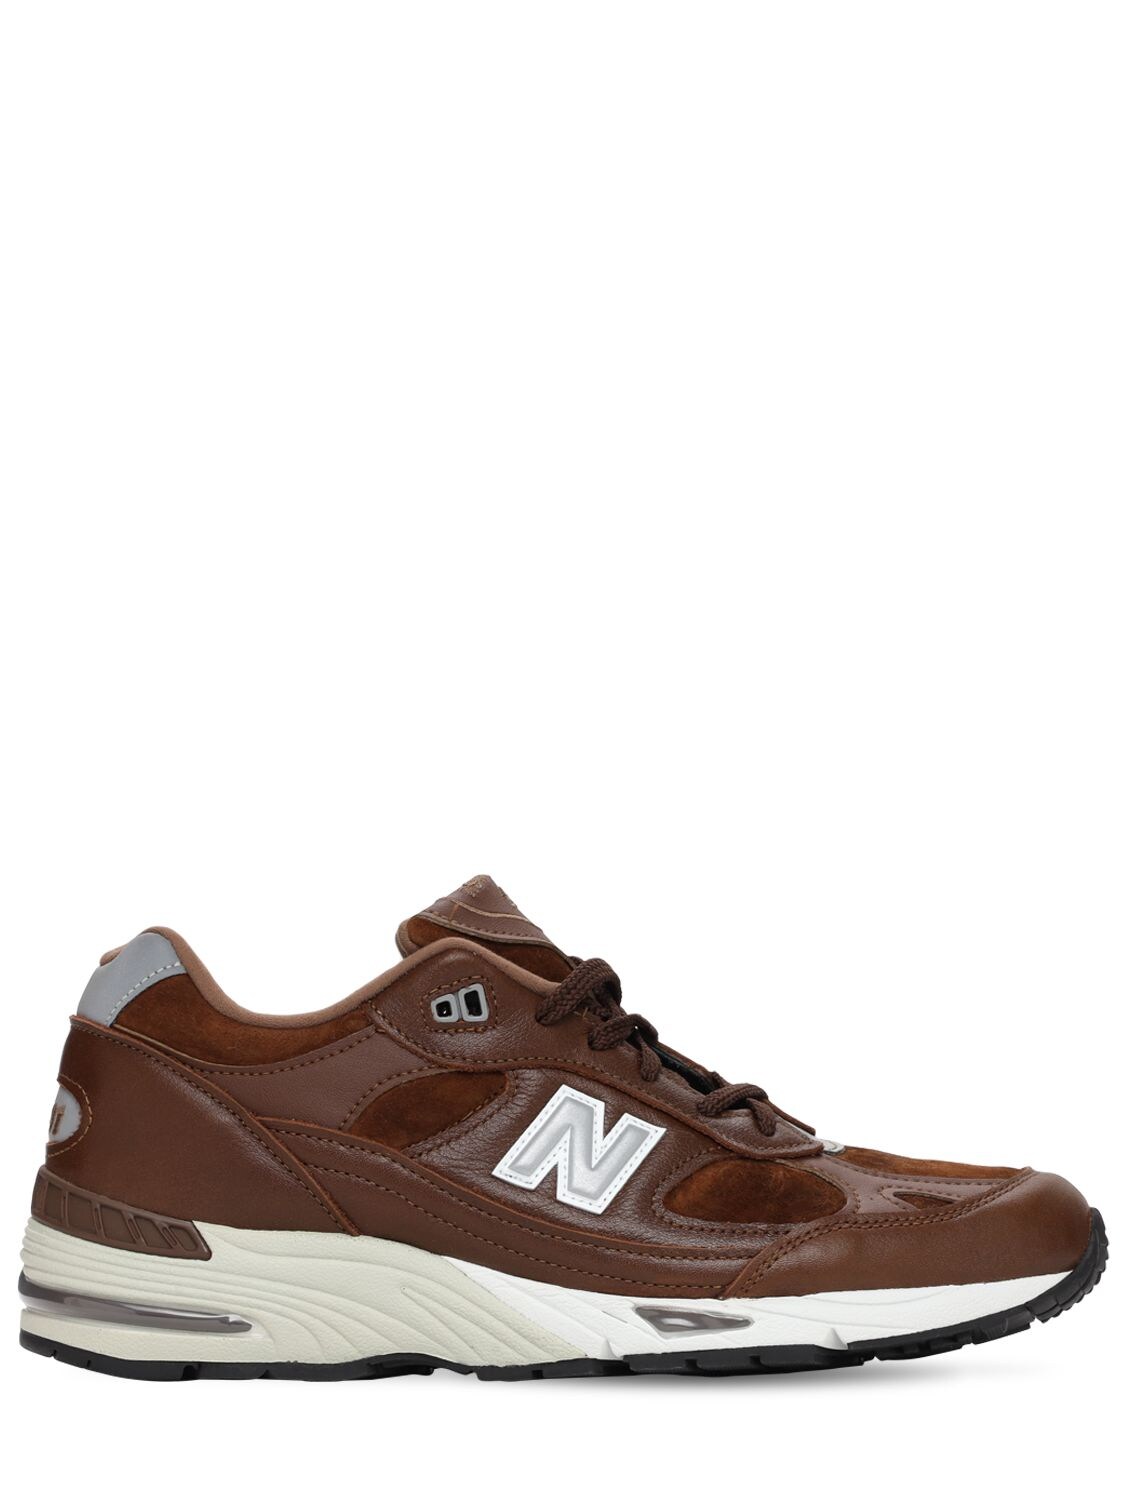 NEW BALANCE 991 SNEAKERS,72I4OW004-TFDT0